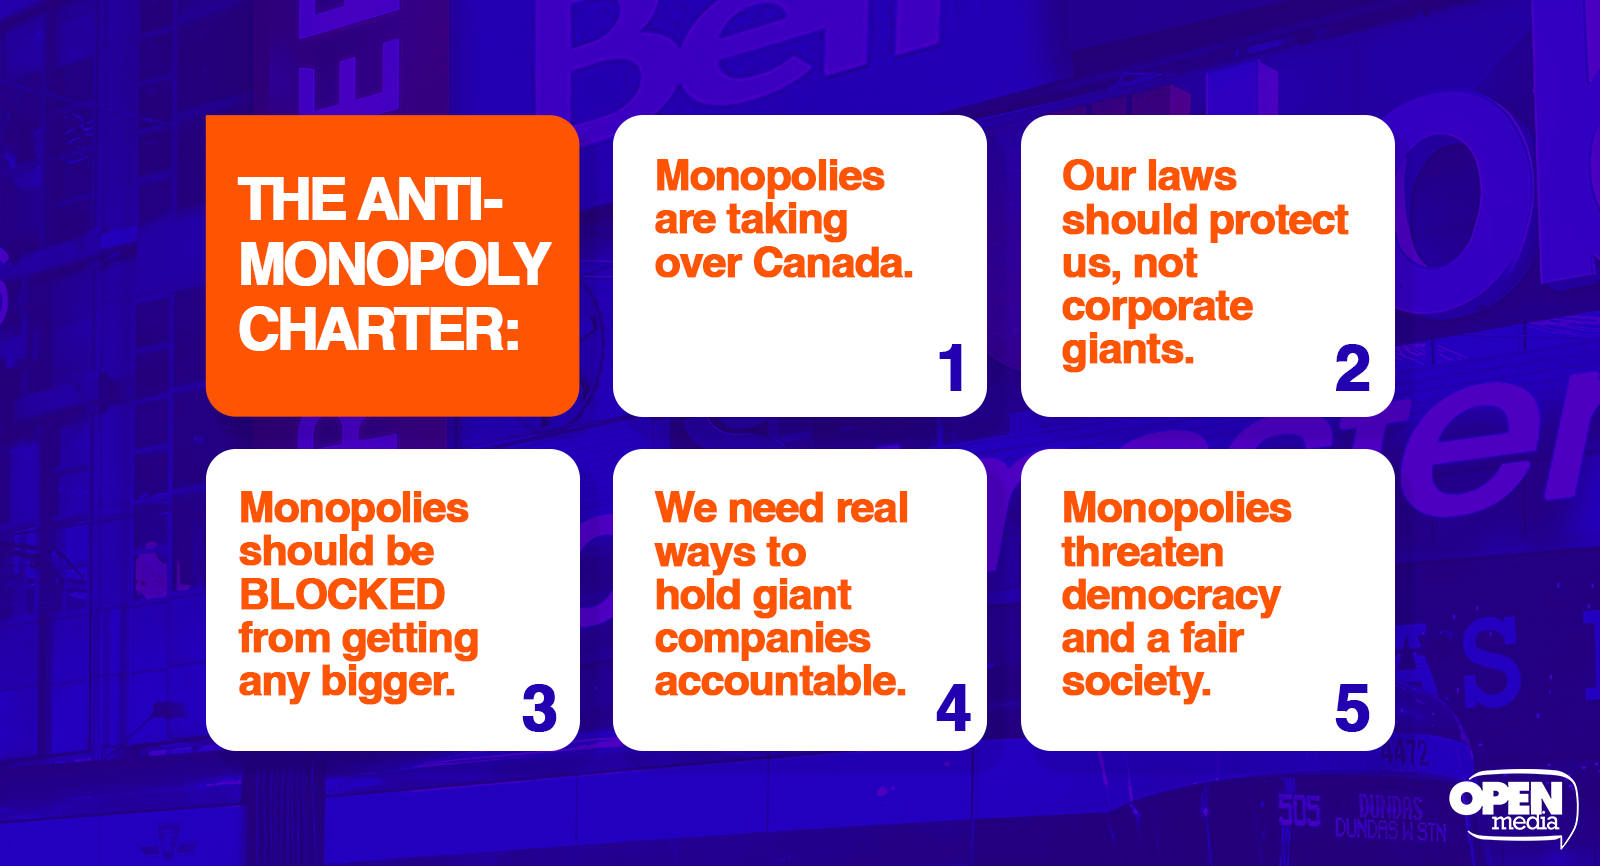 The Anti-Monopoly Charter: 1) Monopolies are taking over Canada, 2) Our laws should protect us, not corporate giants, 3) Monopolies should be BLOCKED from getting any bigger, 4) We need real ways to hold giant companies accountable, 5) Monopolies threaten democracy and a fair society.